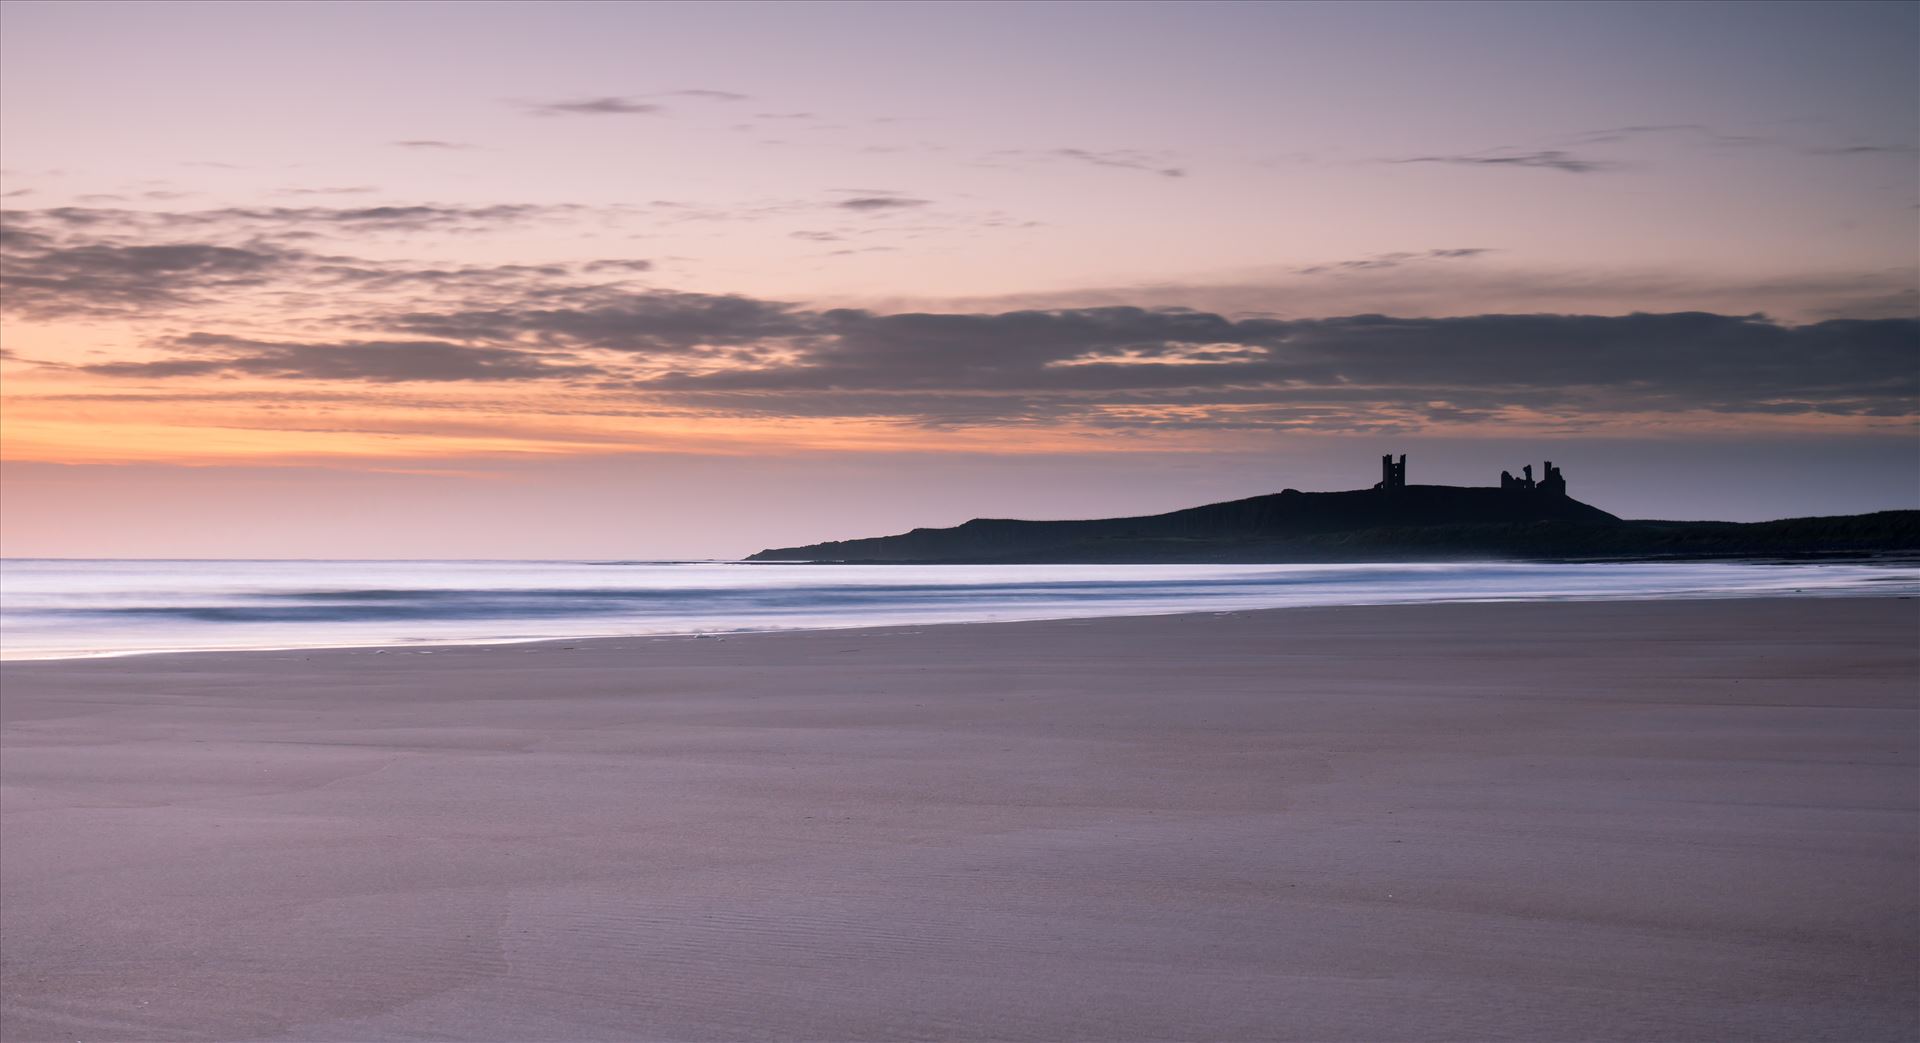 Sunrise at Embleton Bay, Northumberland Embleton Bay is a bay on the North Sea, located to the east of the village of Embleton, Northumberland, England. It lies just to the south of Newton-by-the-Sea and north of Craster by philreay